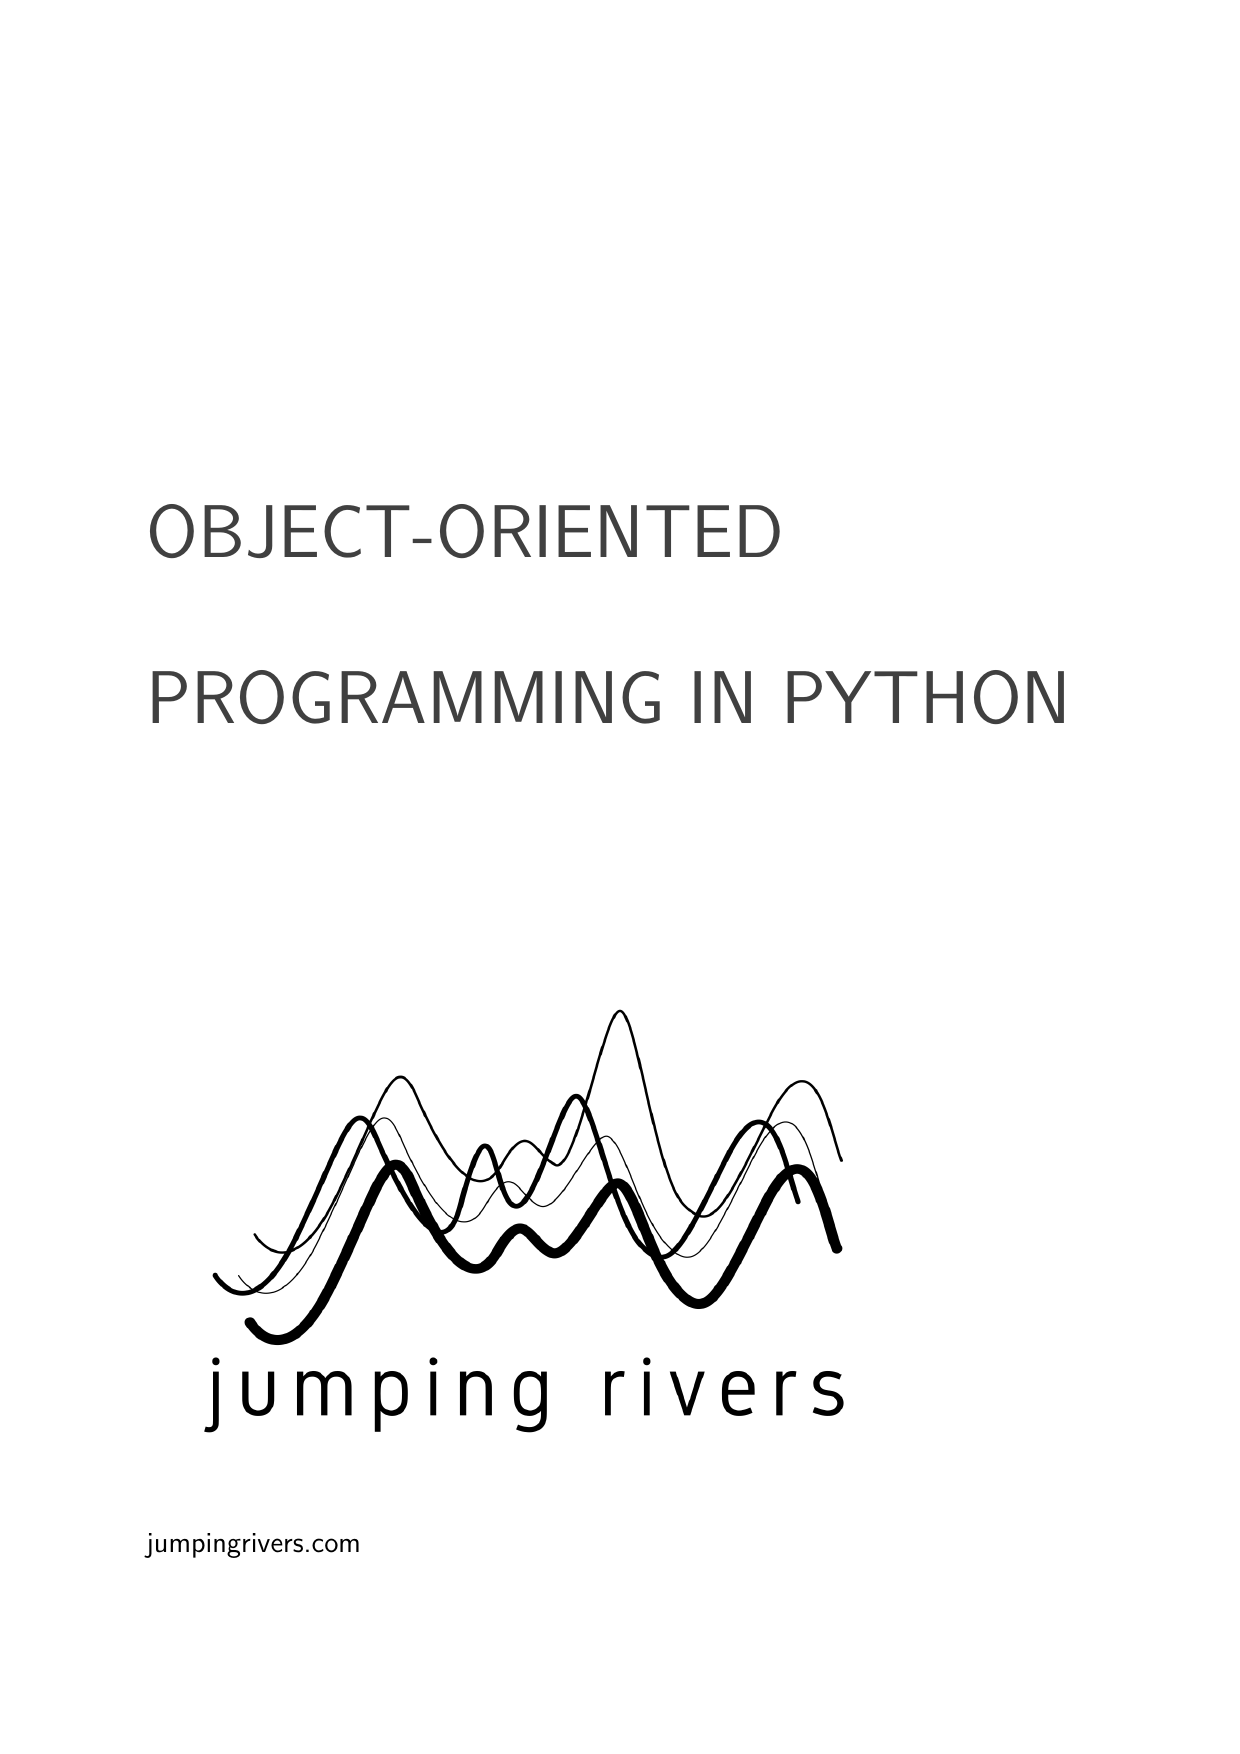 Page 1 of example course material for  Object-Oriented Programming in Python